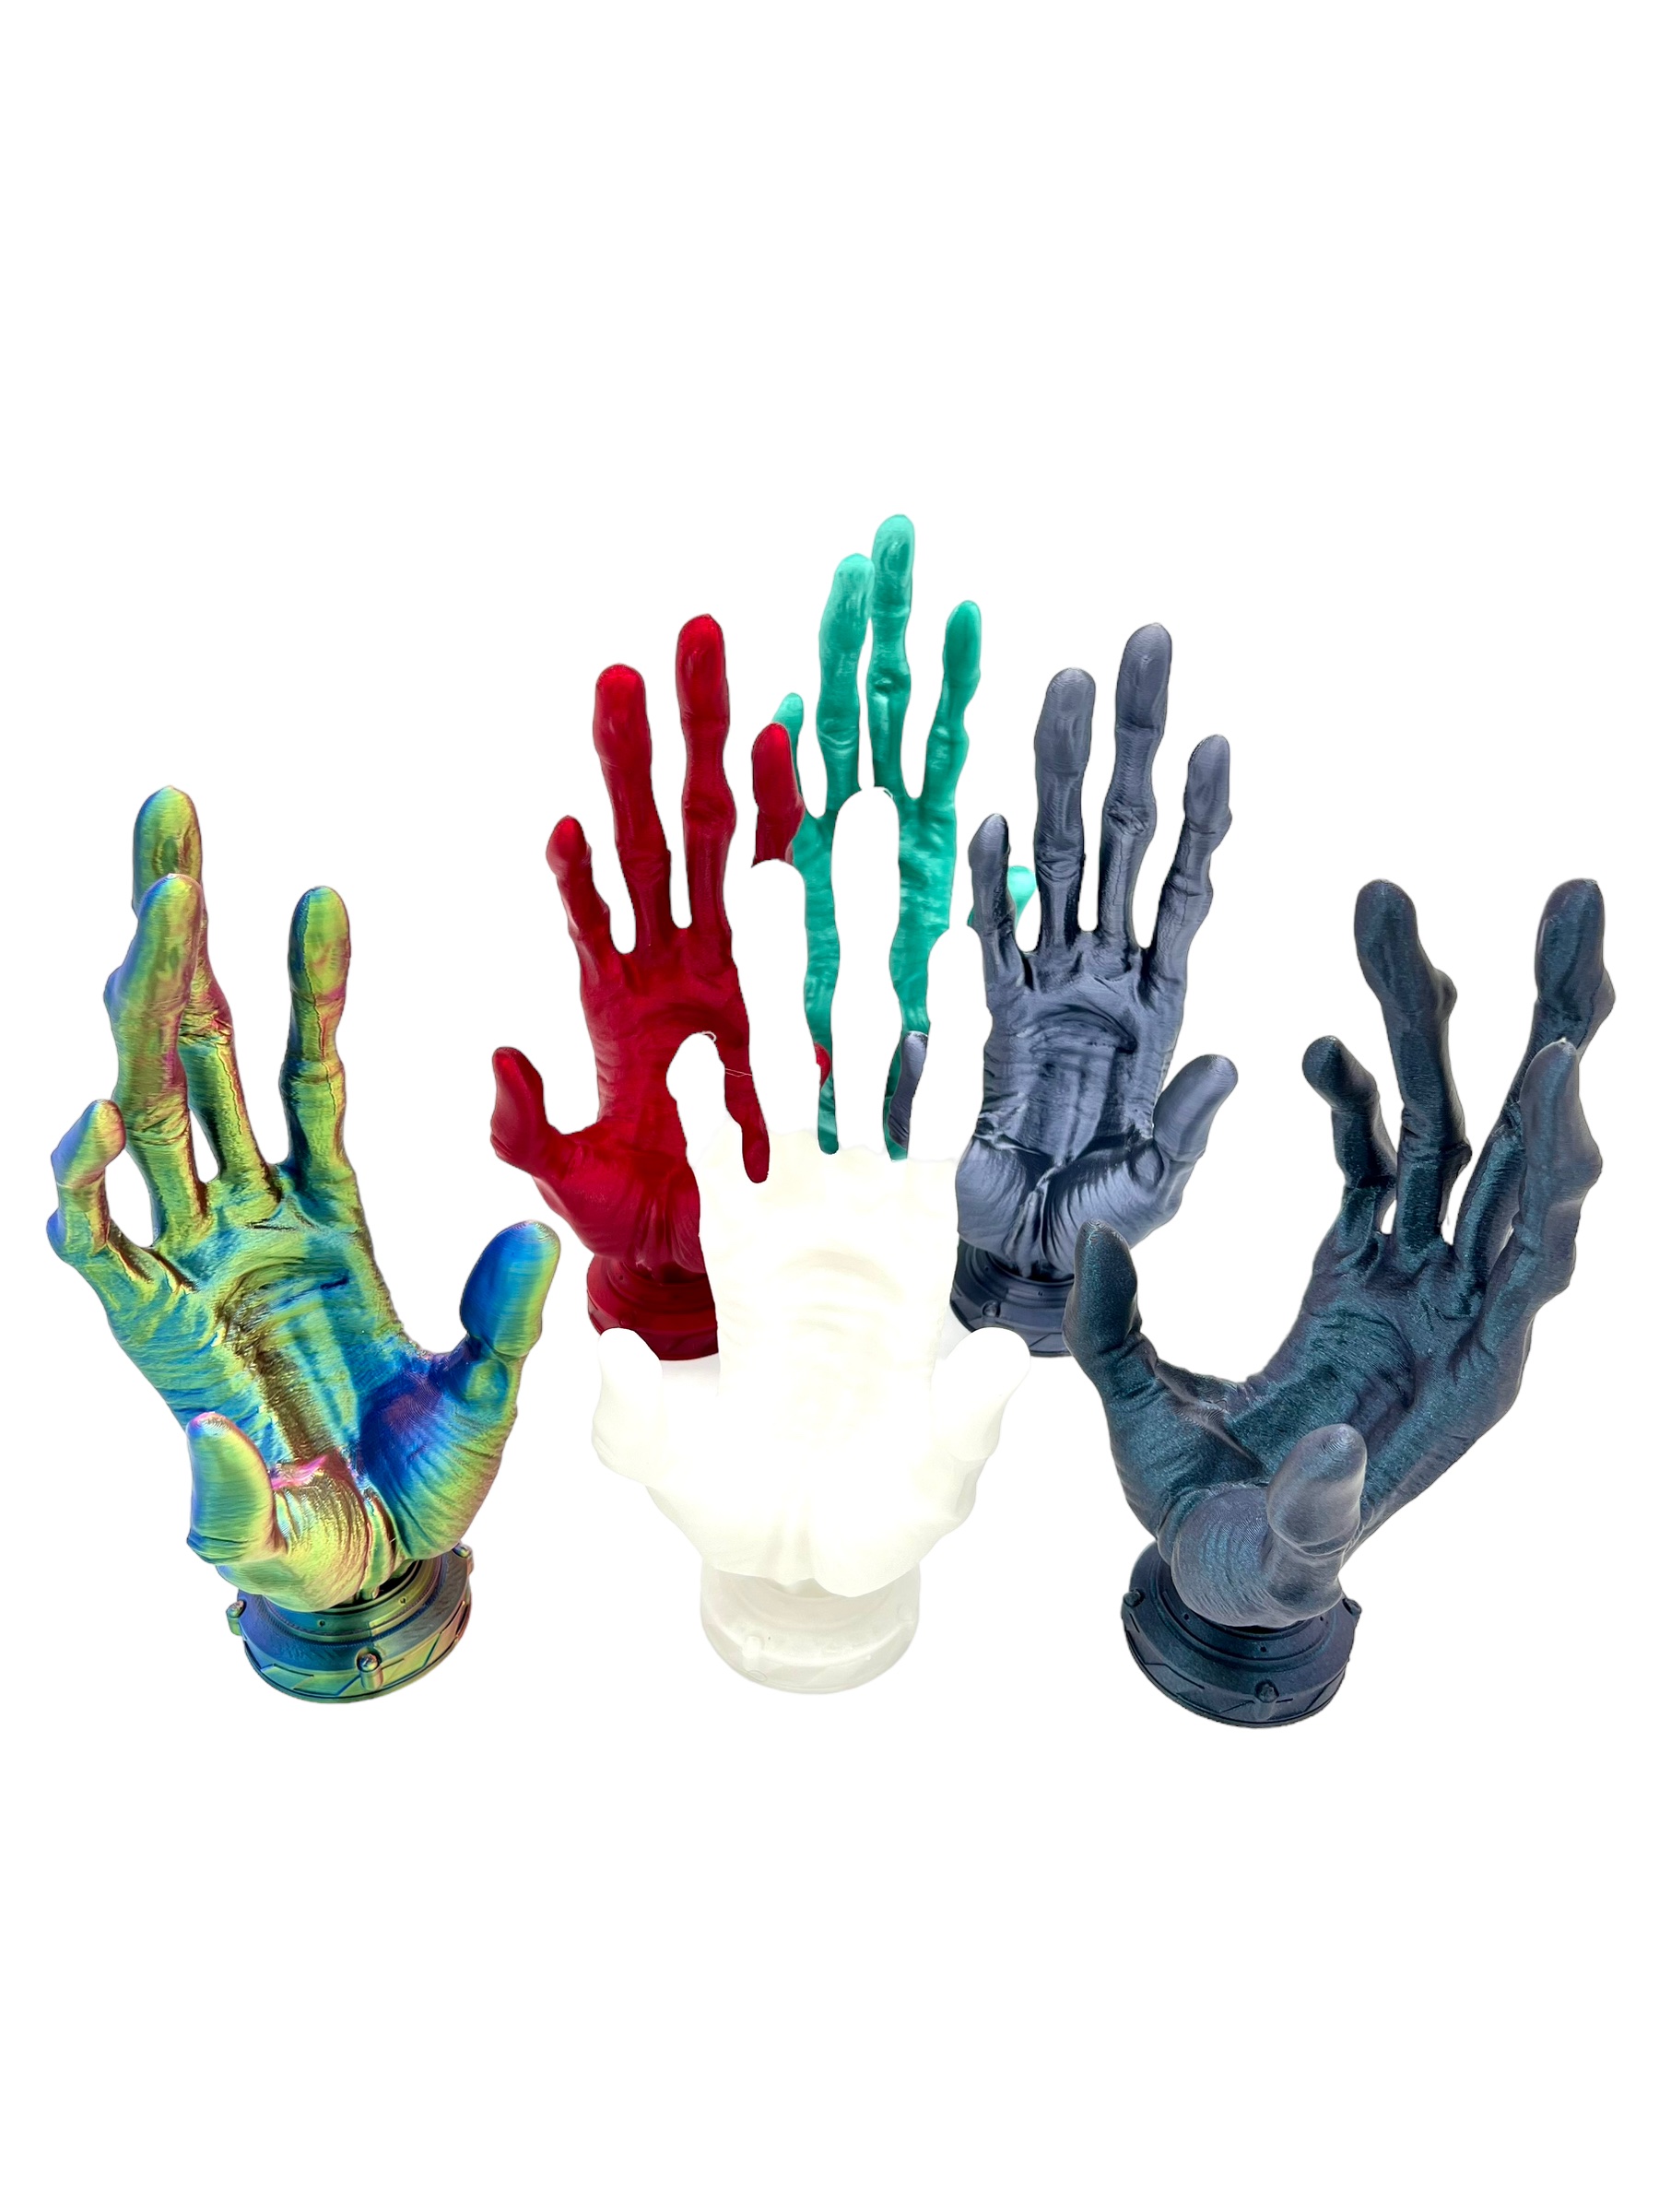 Experience the Future of Gaming with the 3D Printed Six-Finger Alien Hand Controller Holder